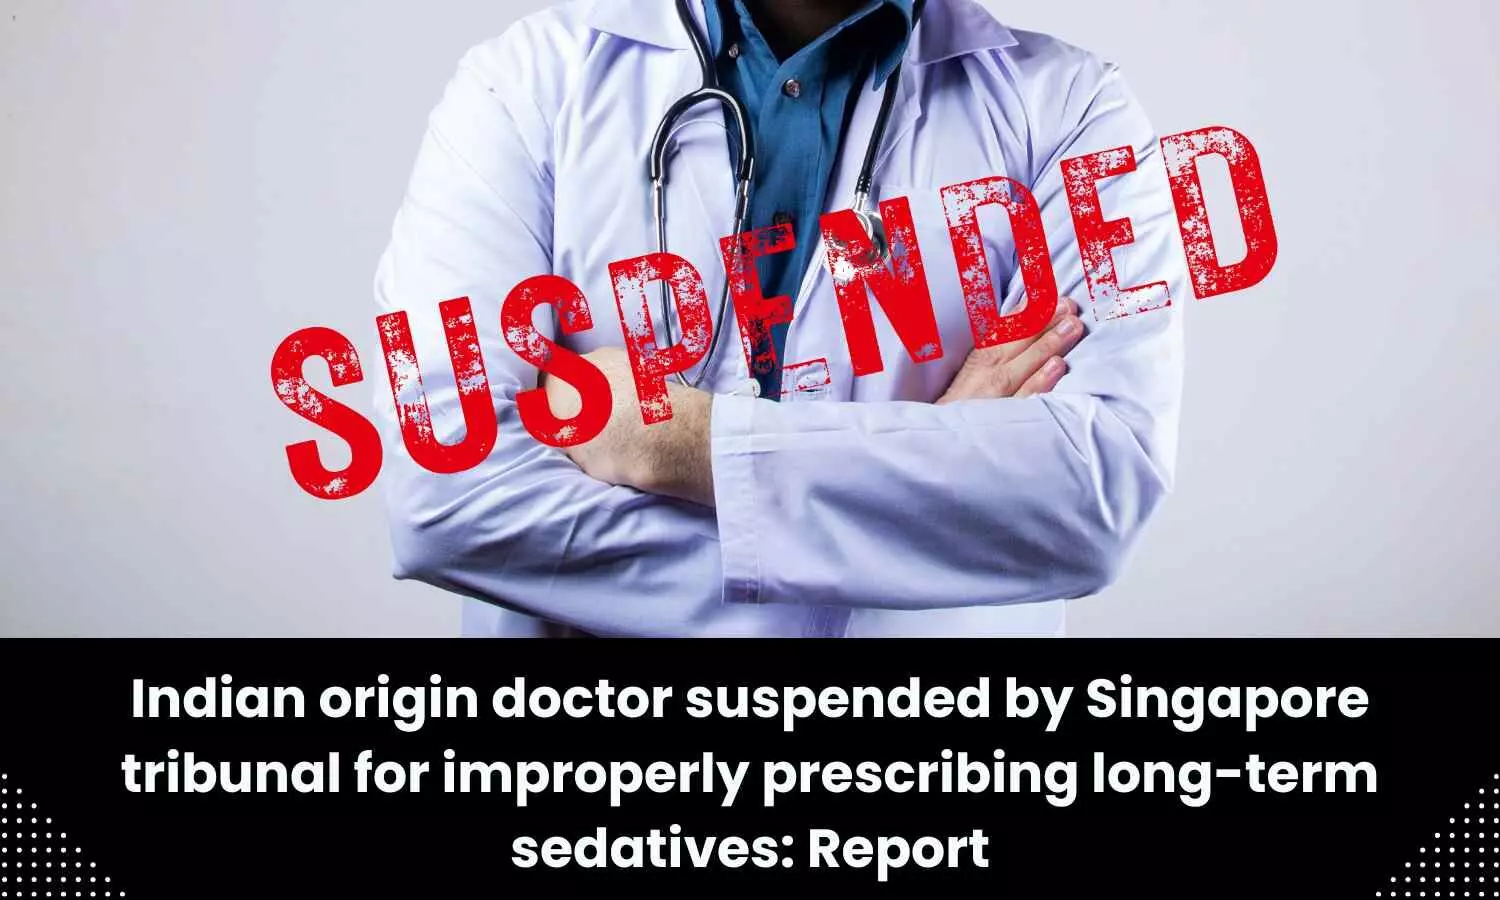 Indian origin doctor suspended by Singapore tribunal for improperly prescribing long-term sedatives: Report